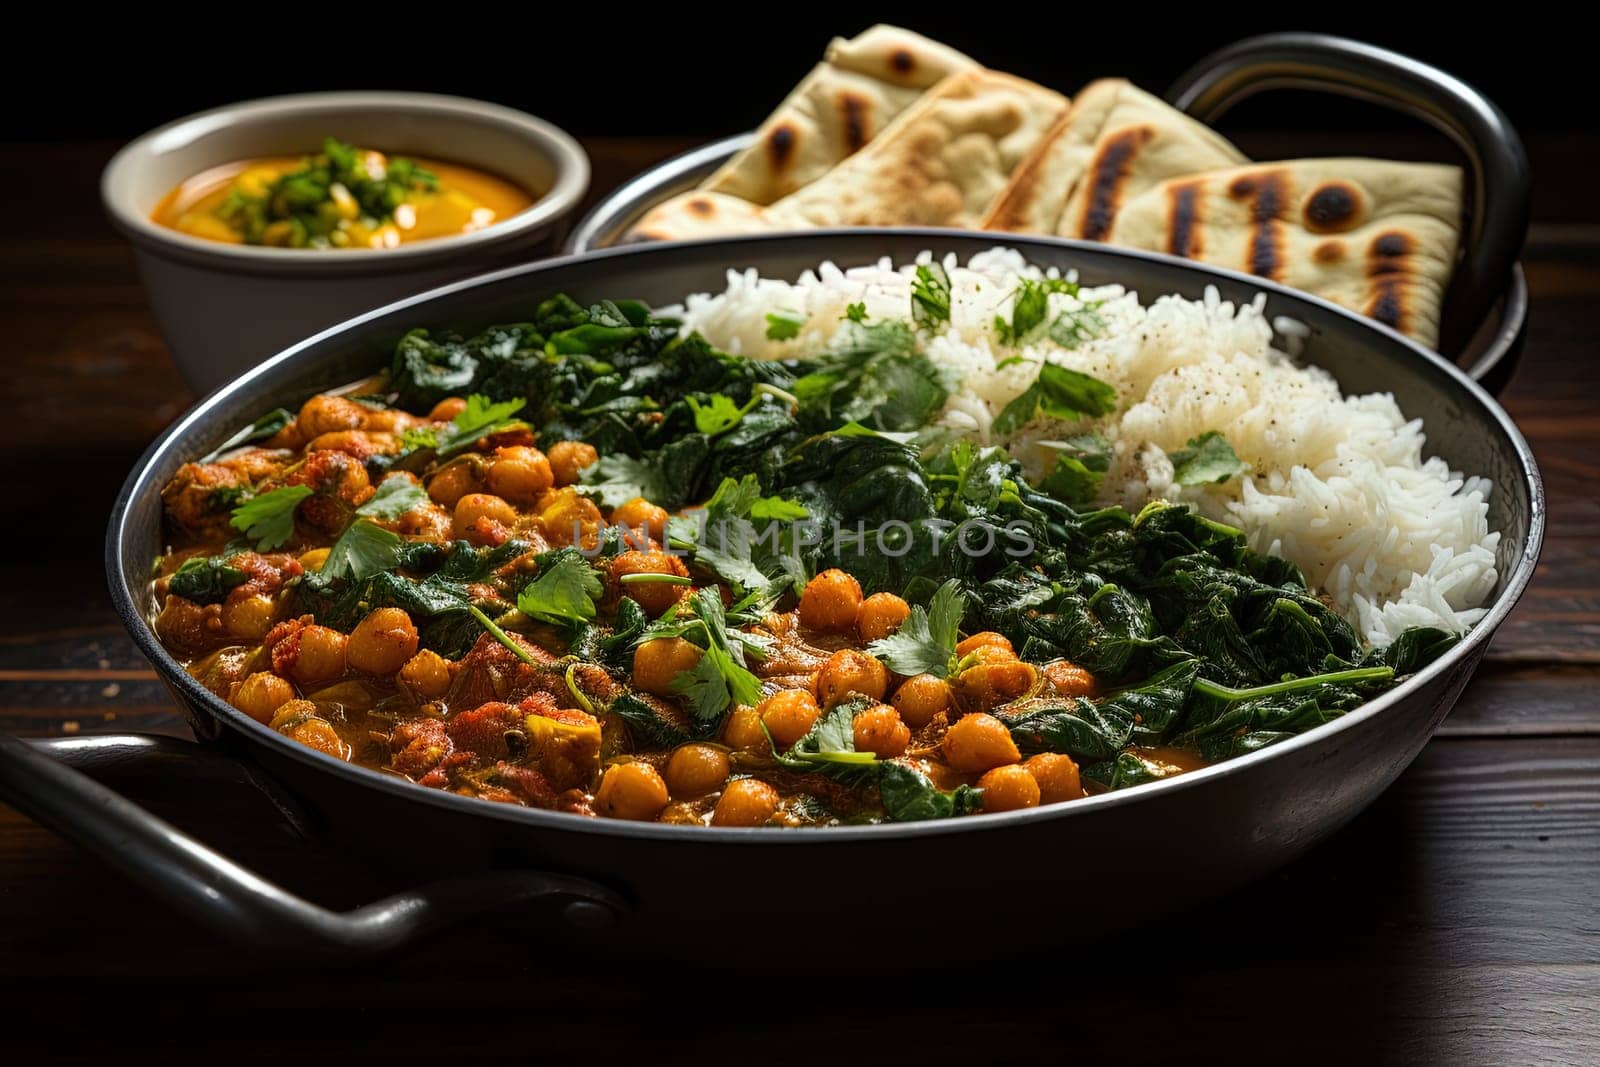 homemade chickpea and spinach curry with white rise dishes. illustration